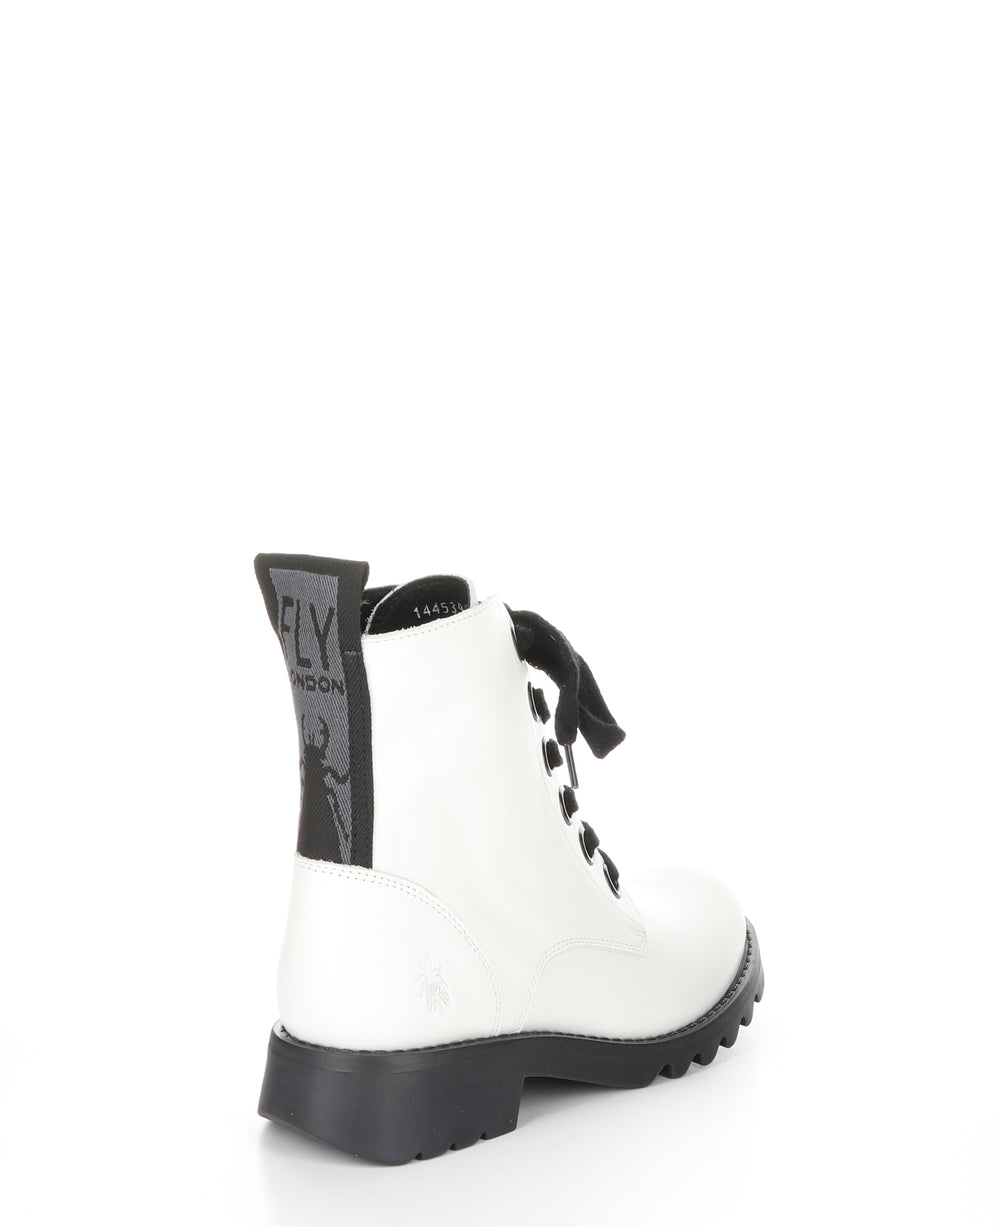 RAGI539FLY Off White Round Toe Boots|RAGI539FLY Bottes à Bout Rond in Blanc